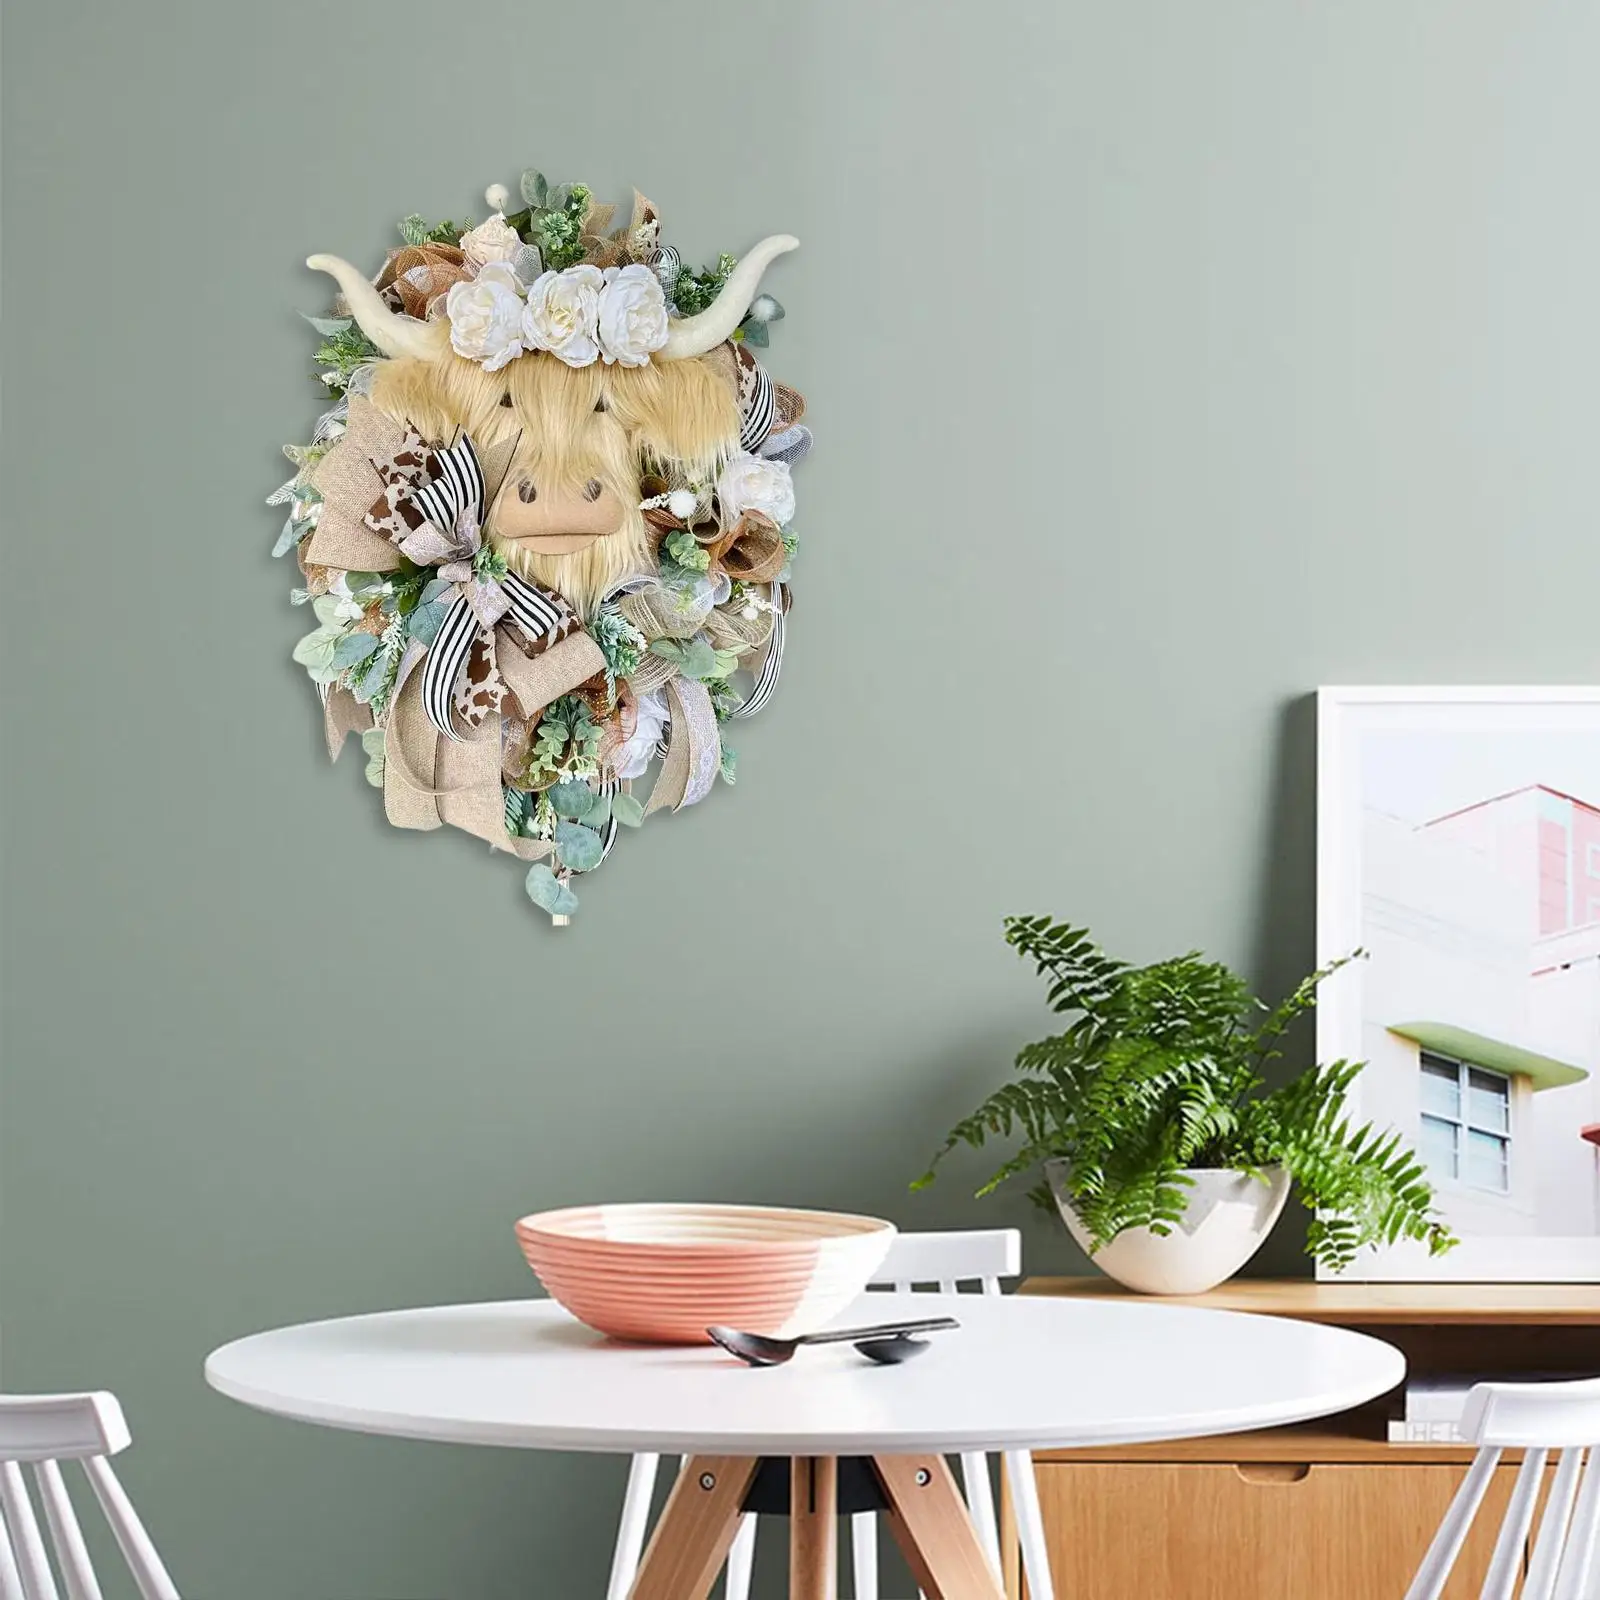 Cattle Wreath Front Door Green Leaves Wall Hanging Craft Artificial Garland for Home Holiday Decoration